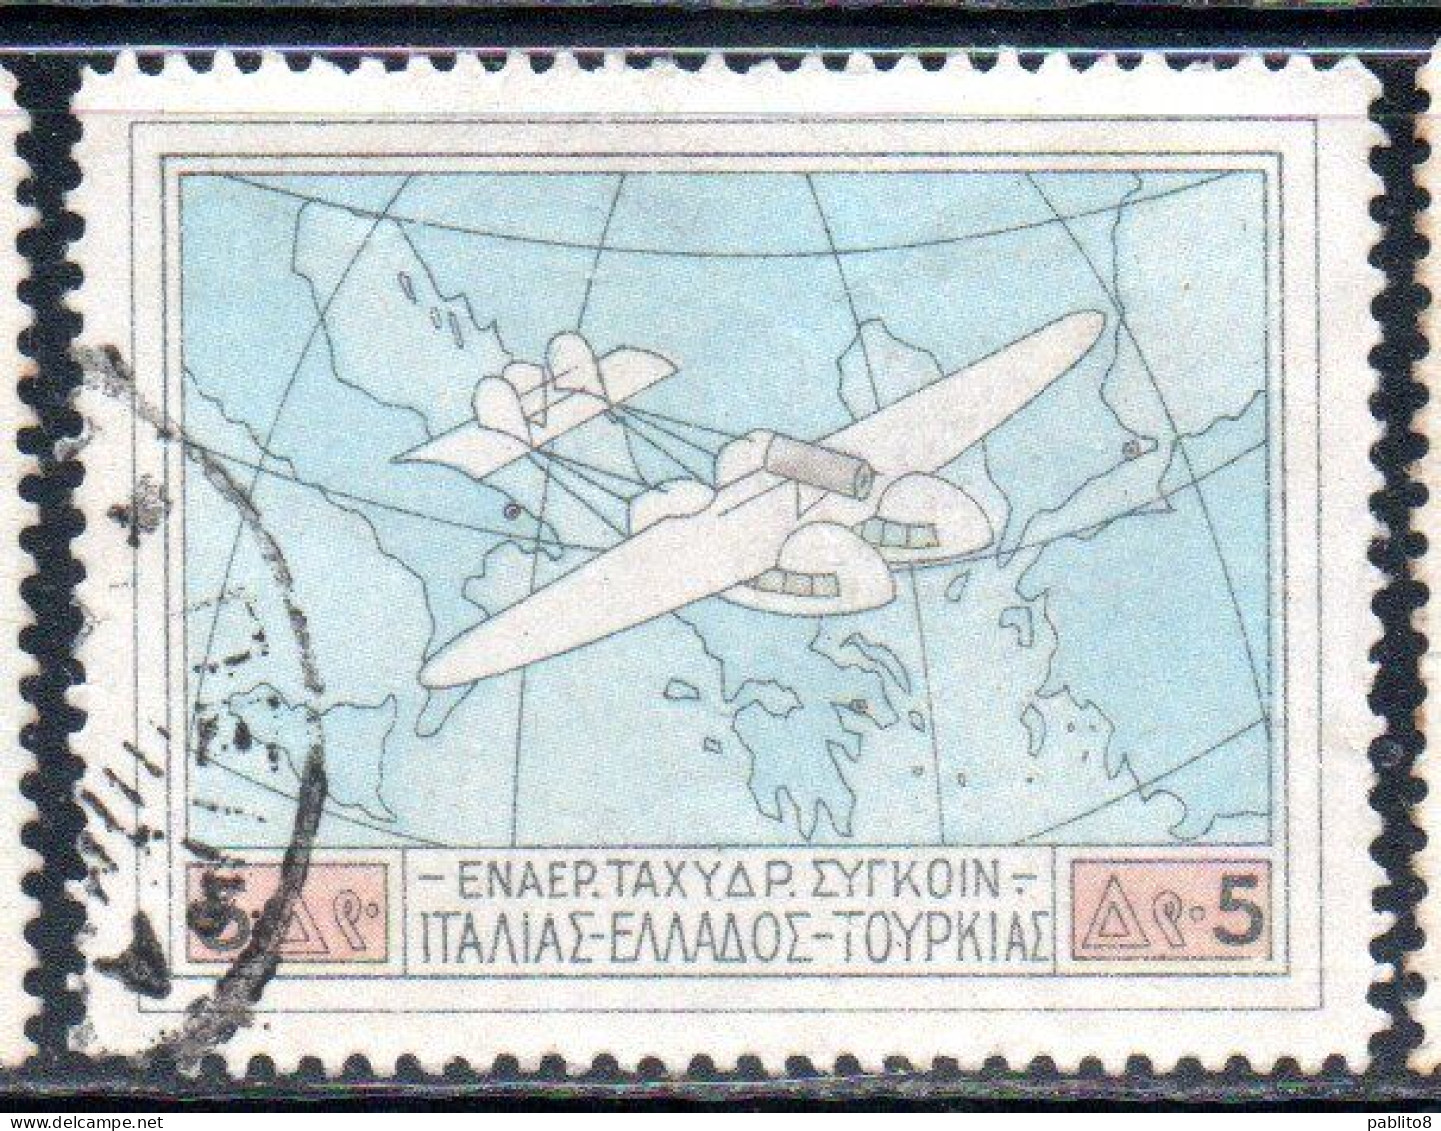 GREECE GRECIA ELLAS 1926 AIR POST MAIL AIRMAIL ITALY-TURKEY-RHODES SERVICE FLYING BOAT OVER MAP SOUTHERN EUROPA 5d USED - Oblitérés